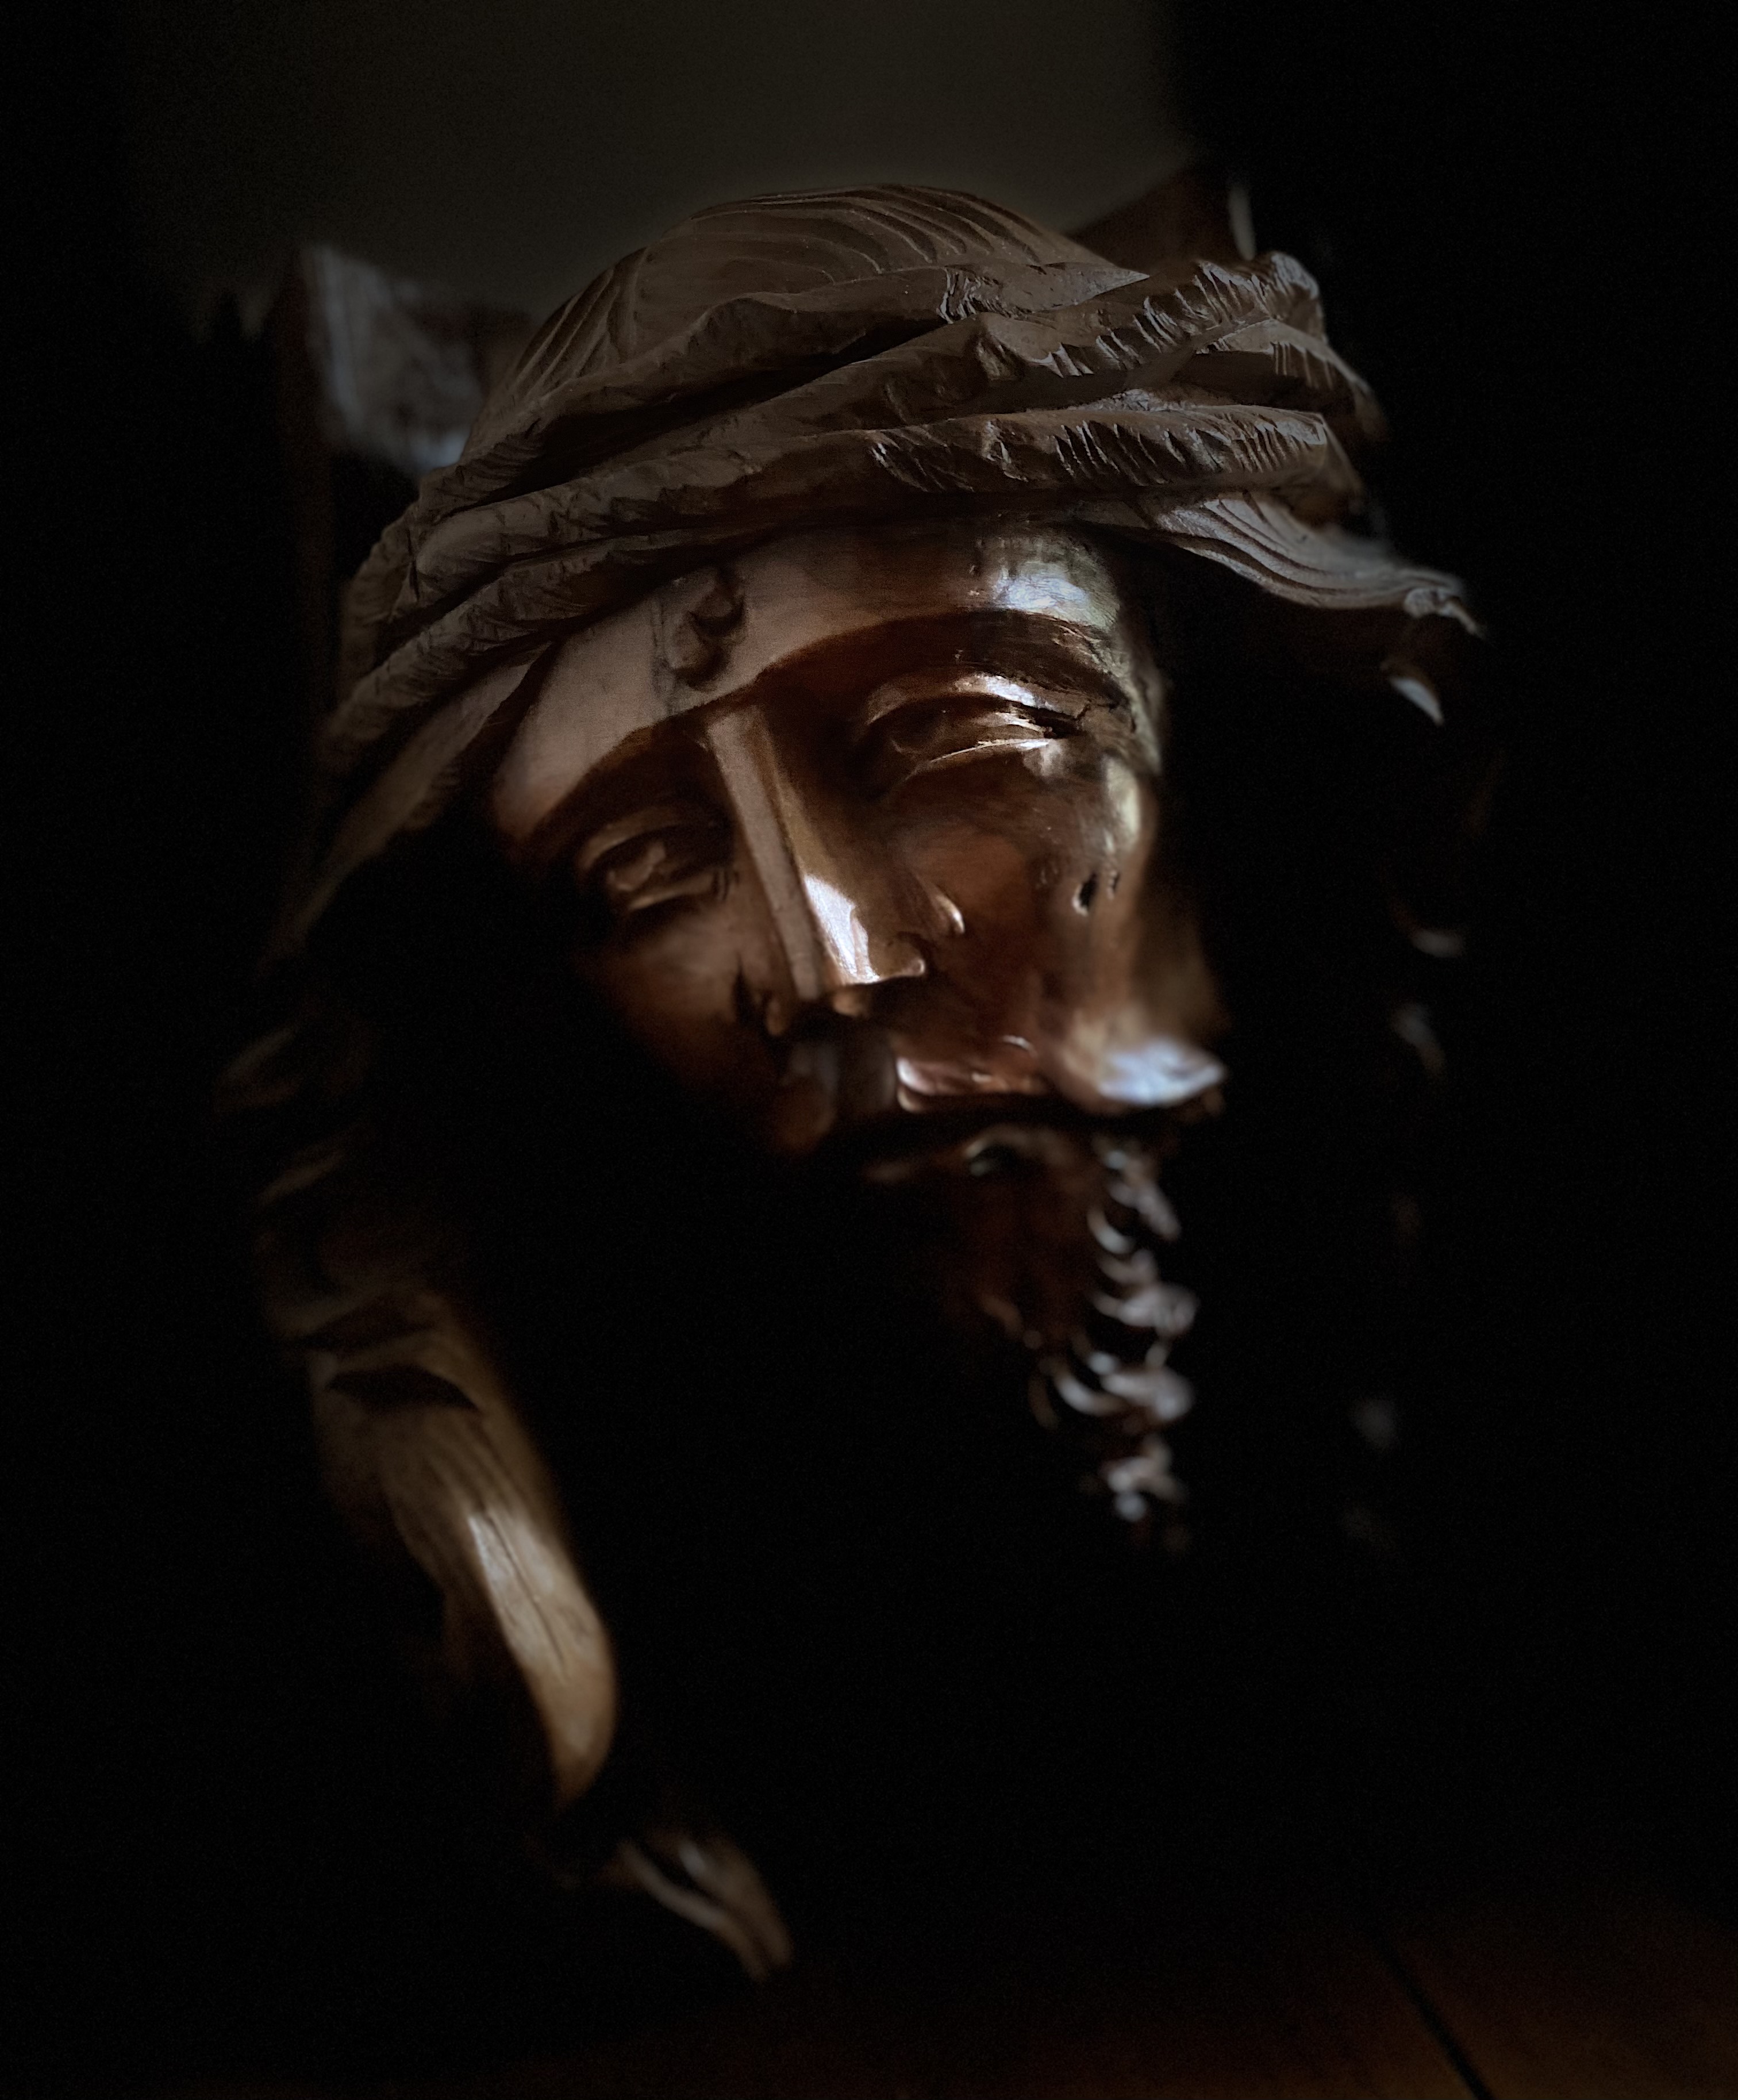 Jesus face on the cross with low light background